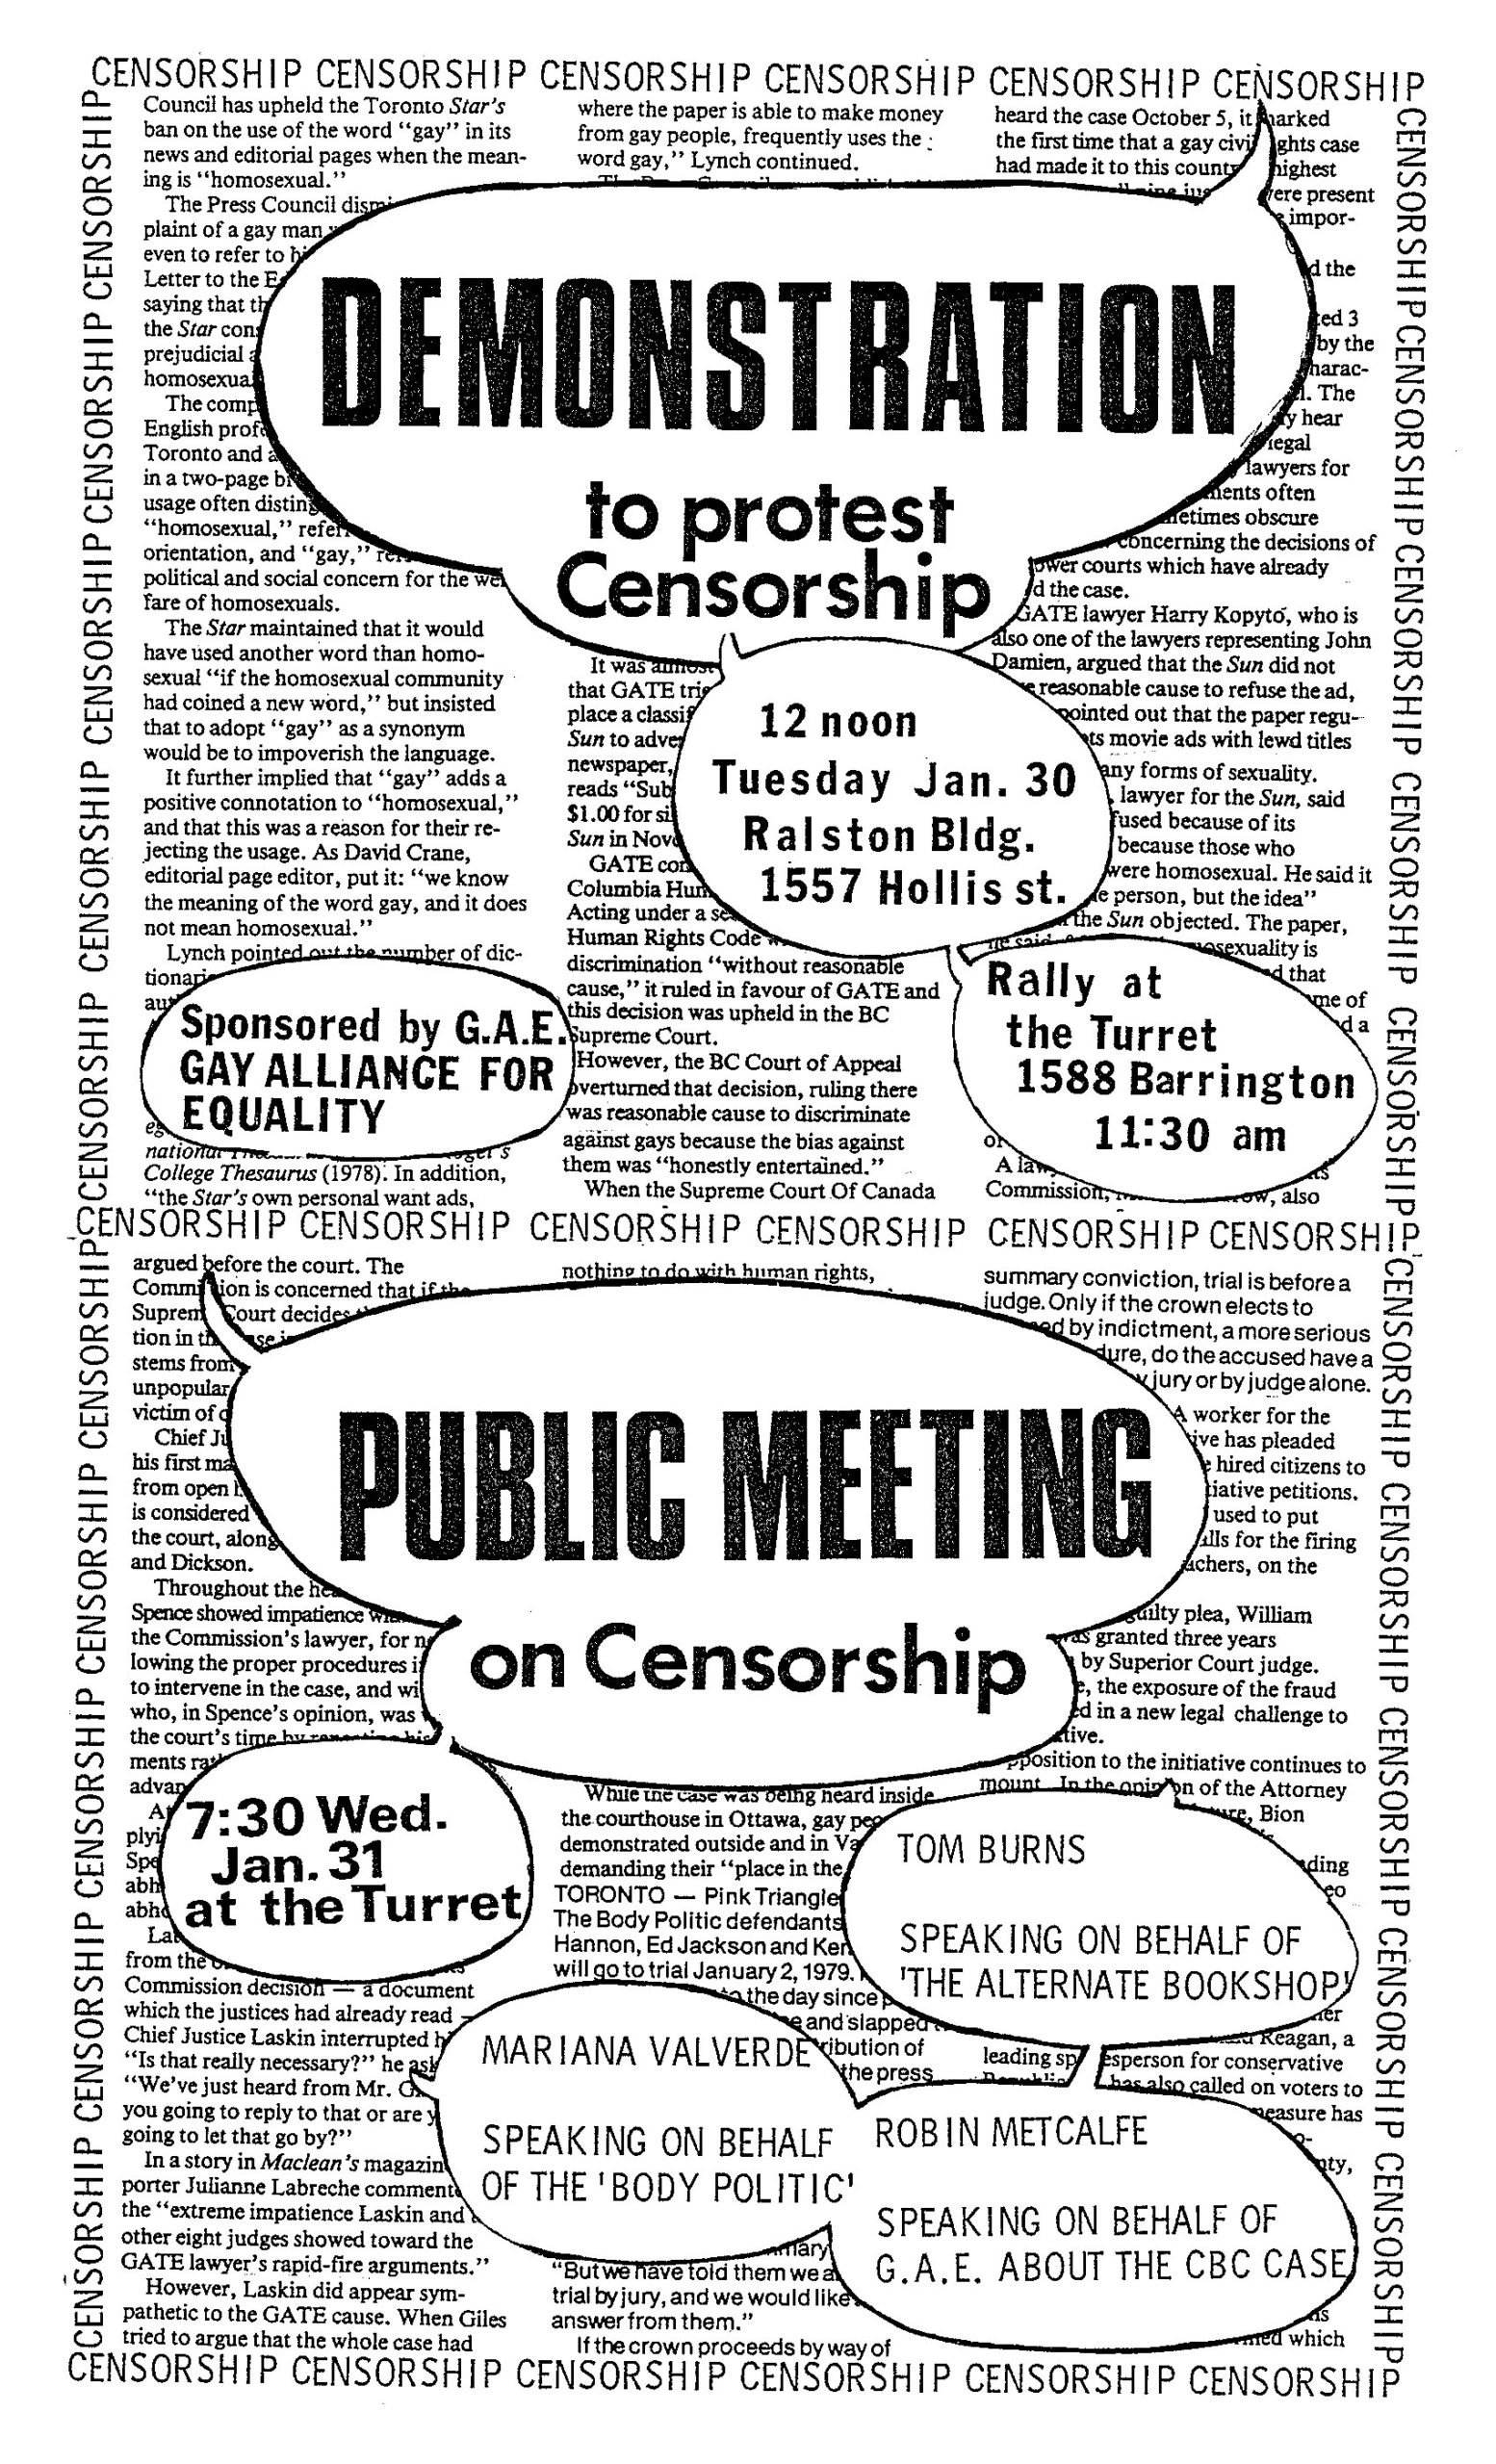 Poster with speech bubble-shaped text boxes collaged over newsclippings about censorship. Text in the speech bubbles at the top reads, “demonstration to protest censorship; 12 noon Tuesday Jan. 30 Ralston Bldg. 1557 Hollis St.; rally at the Turret 1588 Barrington 11:30am; sponsored by G.A.E. Gay Alliance for Equality.” The text in the speech bubbles at the bottom reads, “public meeting on censorship; 7:30 Wed. Jan. 31 at the Turret; Tom Burns speaking on behalf of ‘The Alternative Bookshop’; Robin Metcalfe speaking on behalf of G.A.E. about the CBC case; Mariana Valverde speaking on behalf of ‘The Body Politic.’”